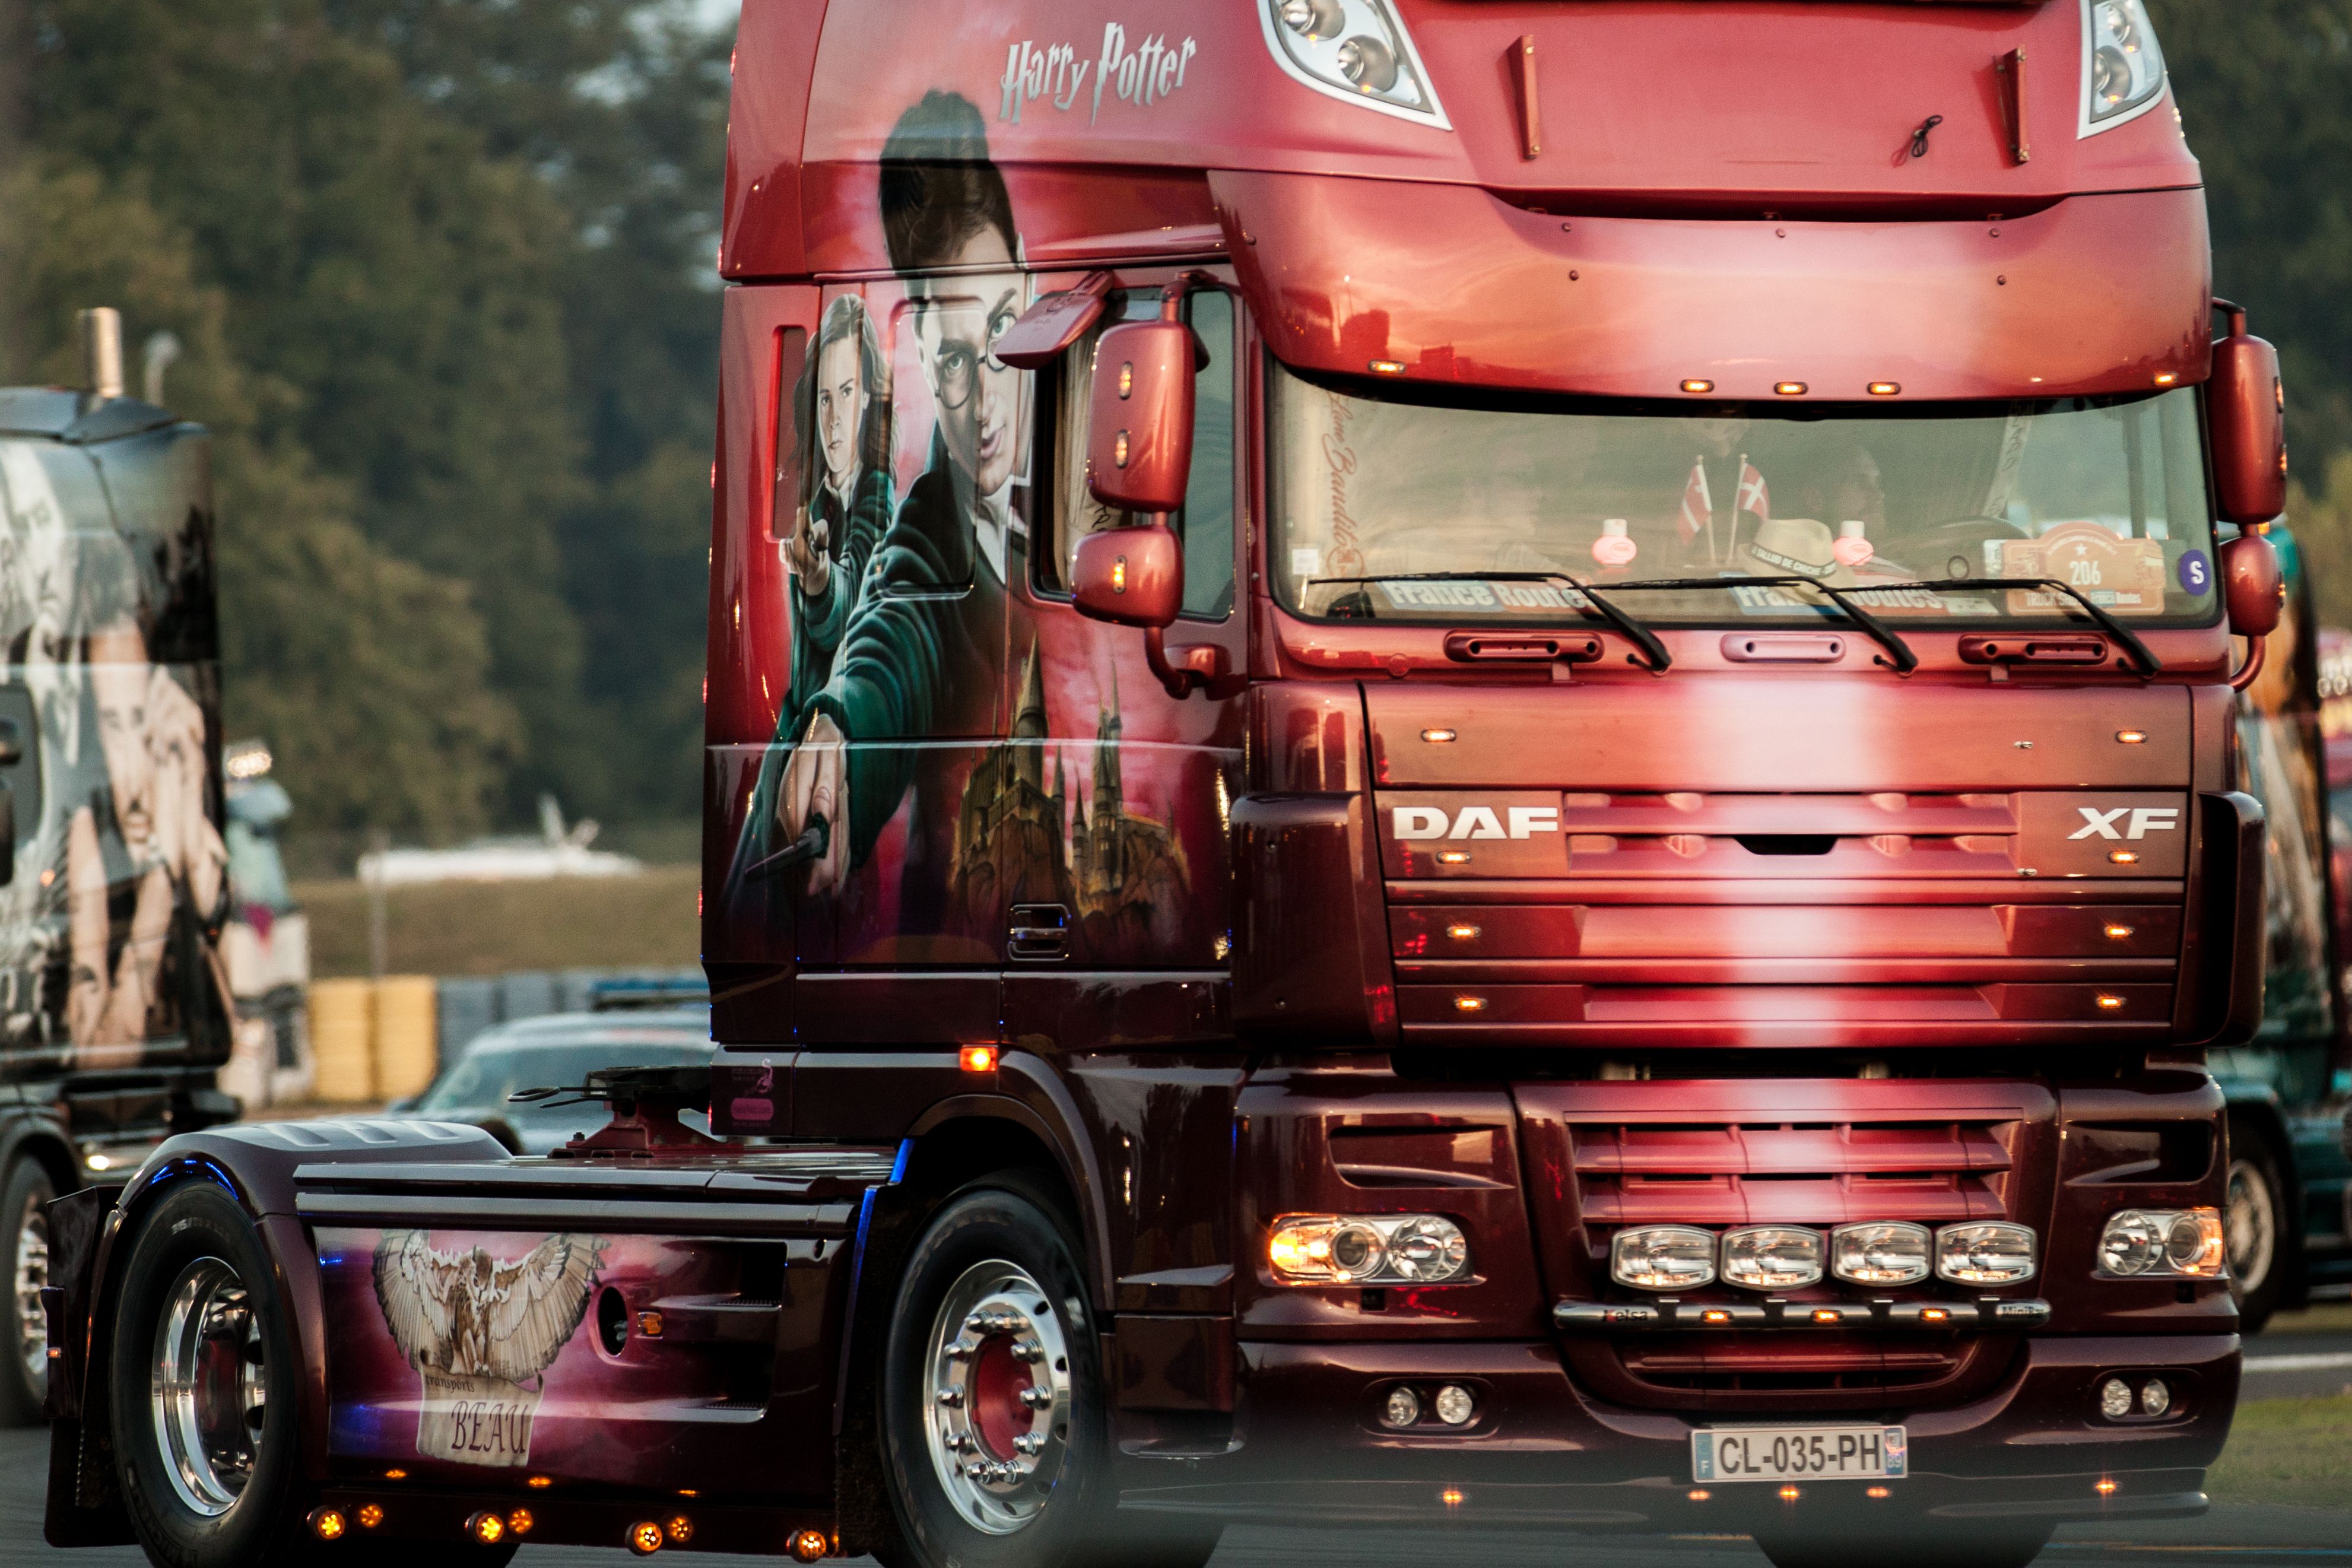 DAF Truck Picture High Resolution Photo Galleries To Download